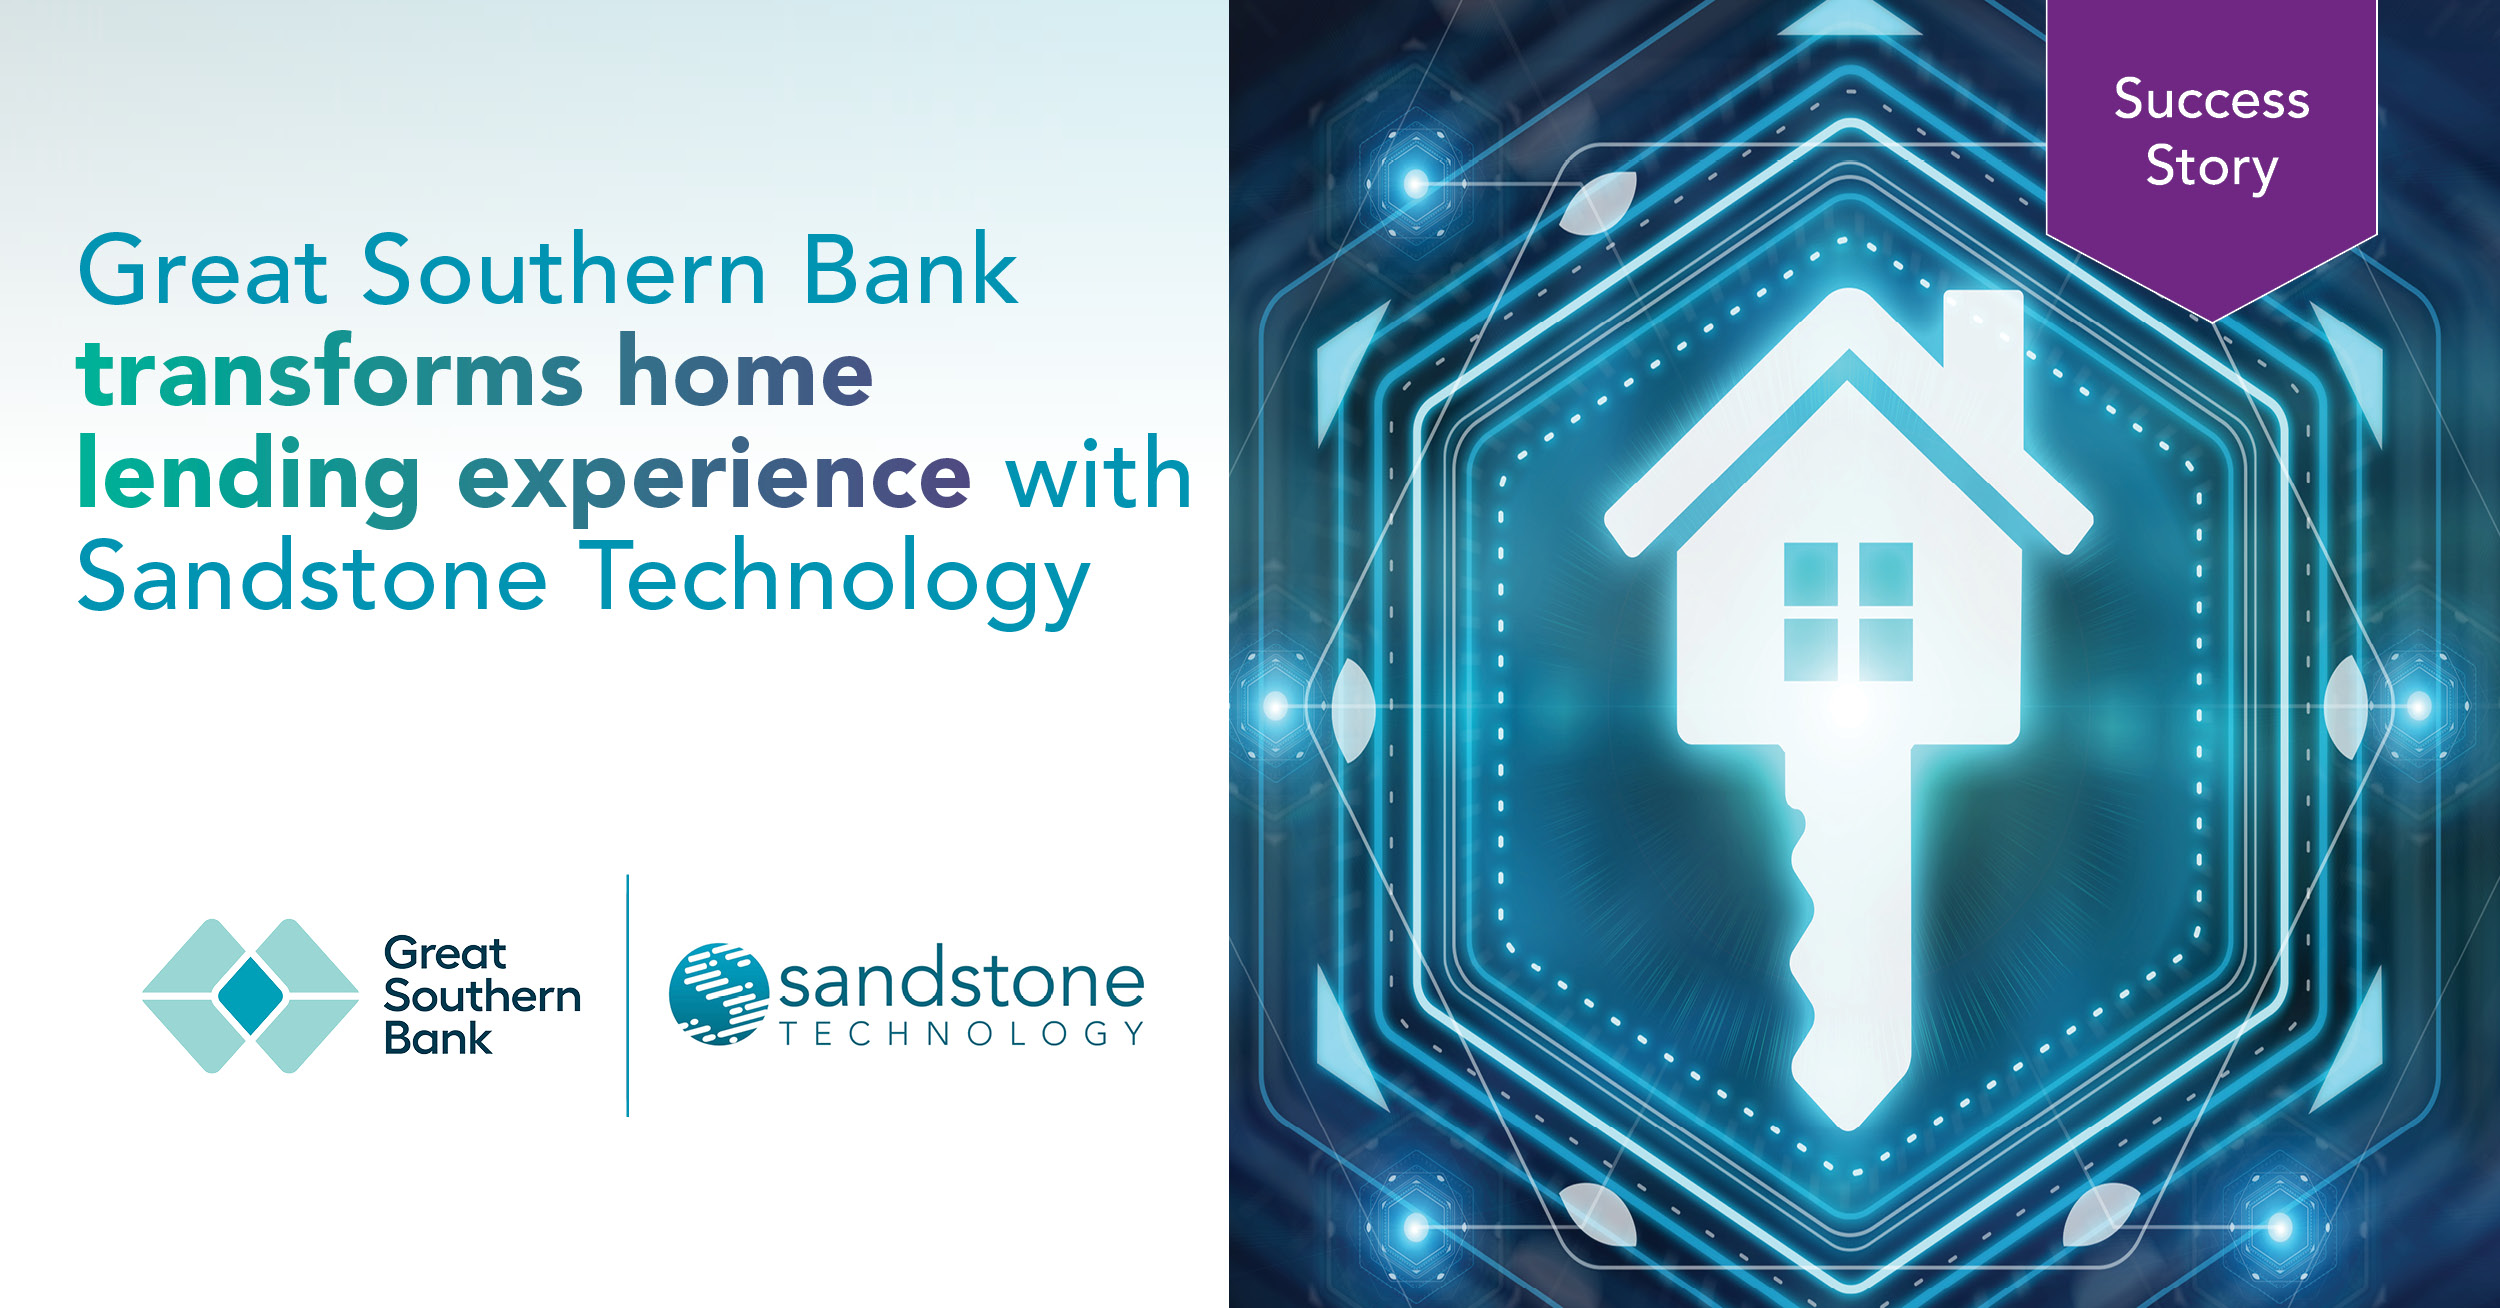 Great Southern Bank transforms home lending experience with Sandstone Technology